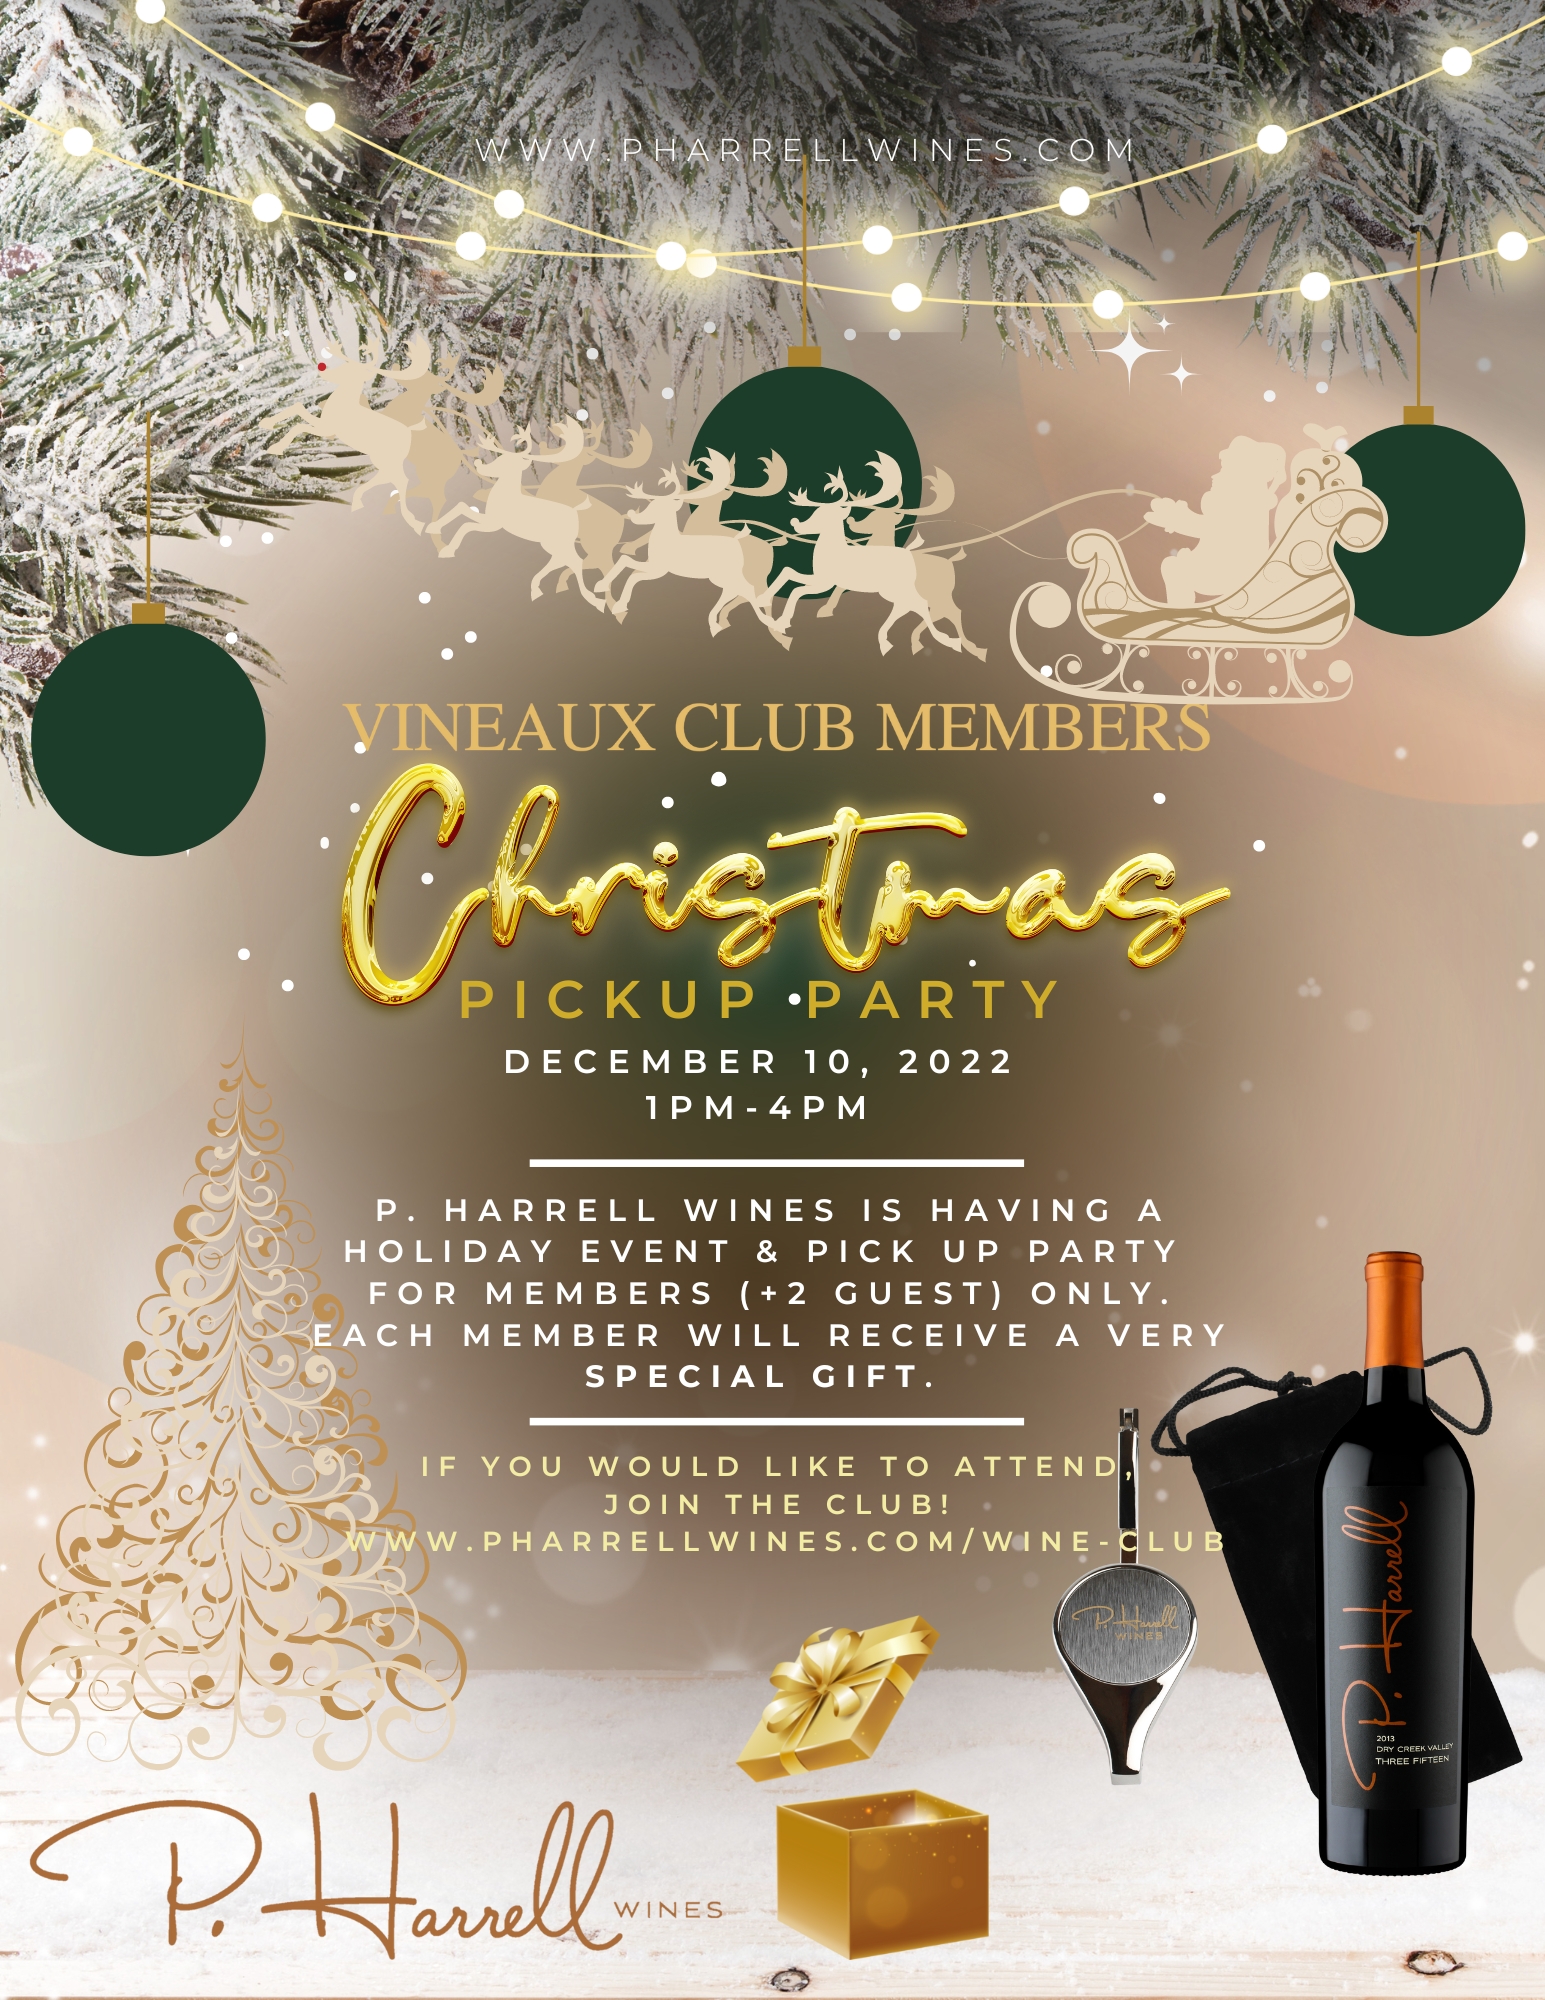 P. Harrell Wines Club "Vineaux Club" Announces Holiday NFT Giveaway